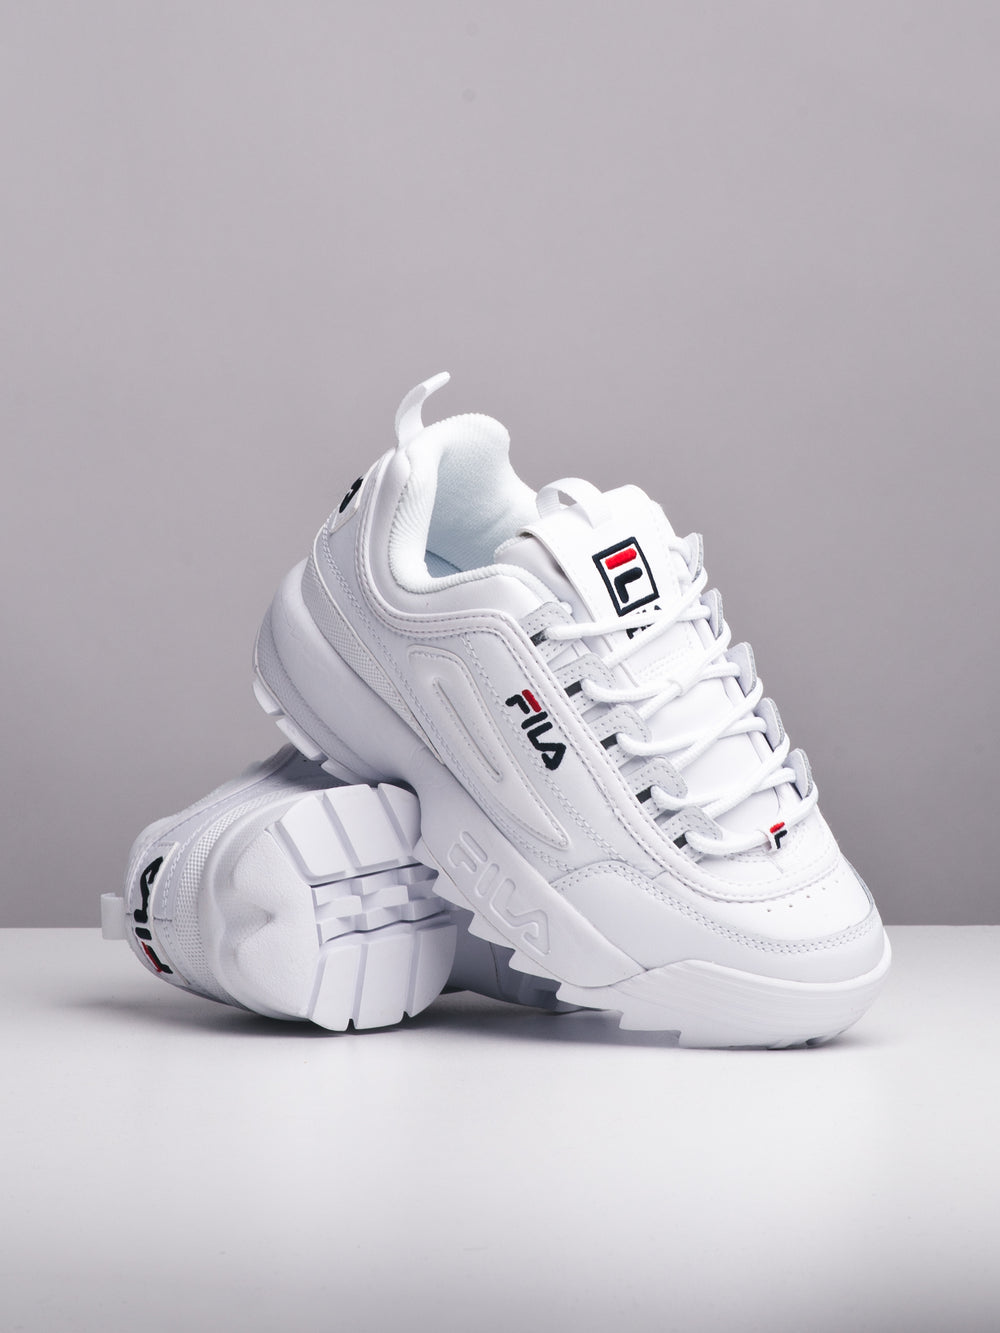 Fila Unit LE Women's Platform Sneakers | Truly One Of A Kind! - YouTube